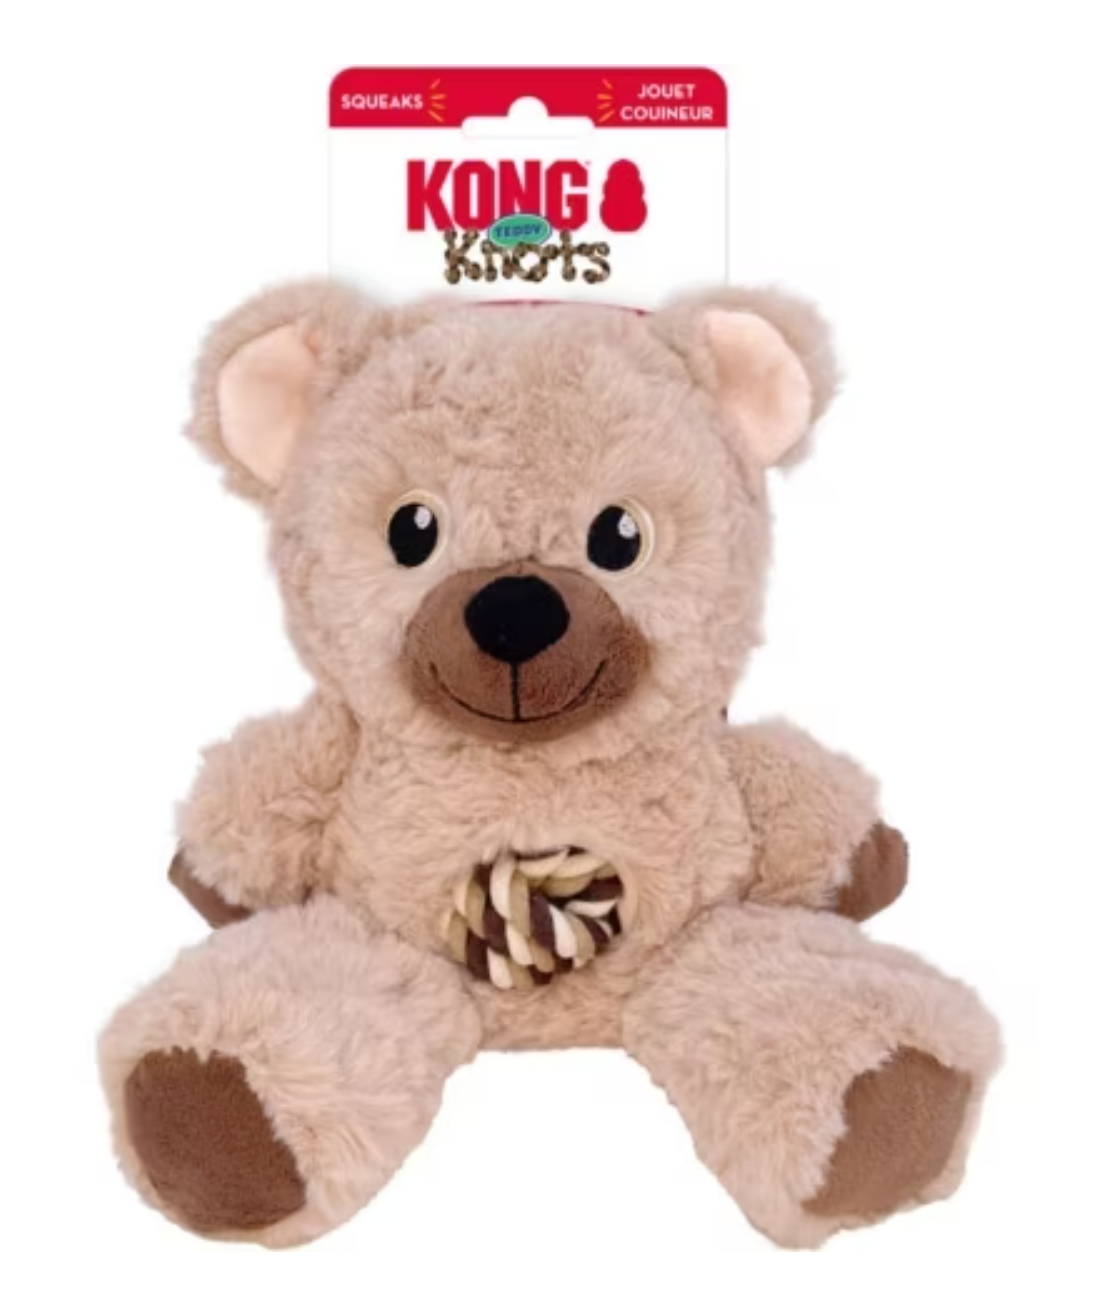 Kong Knots Dog Toy (Assorted) - Teddy